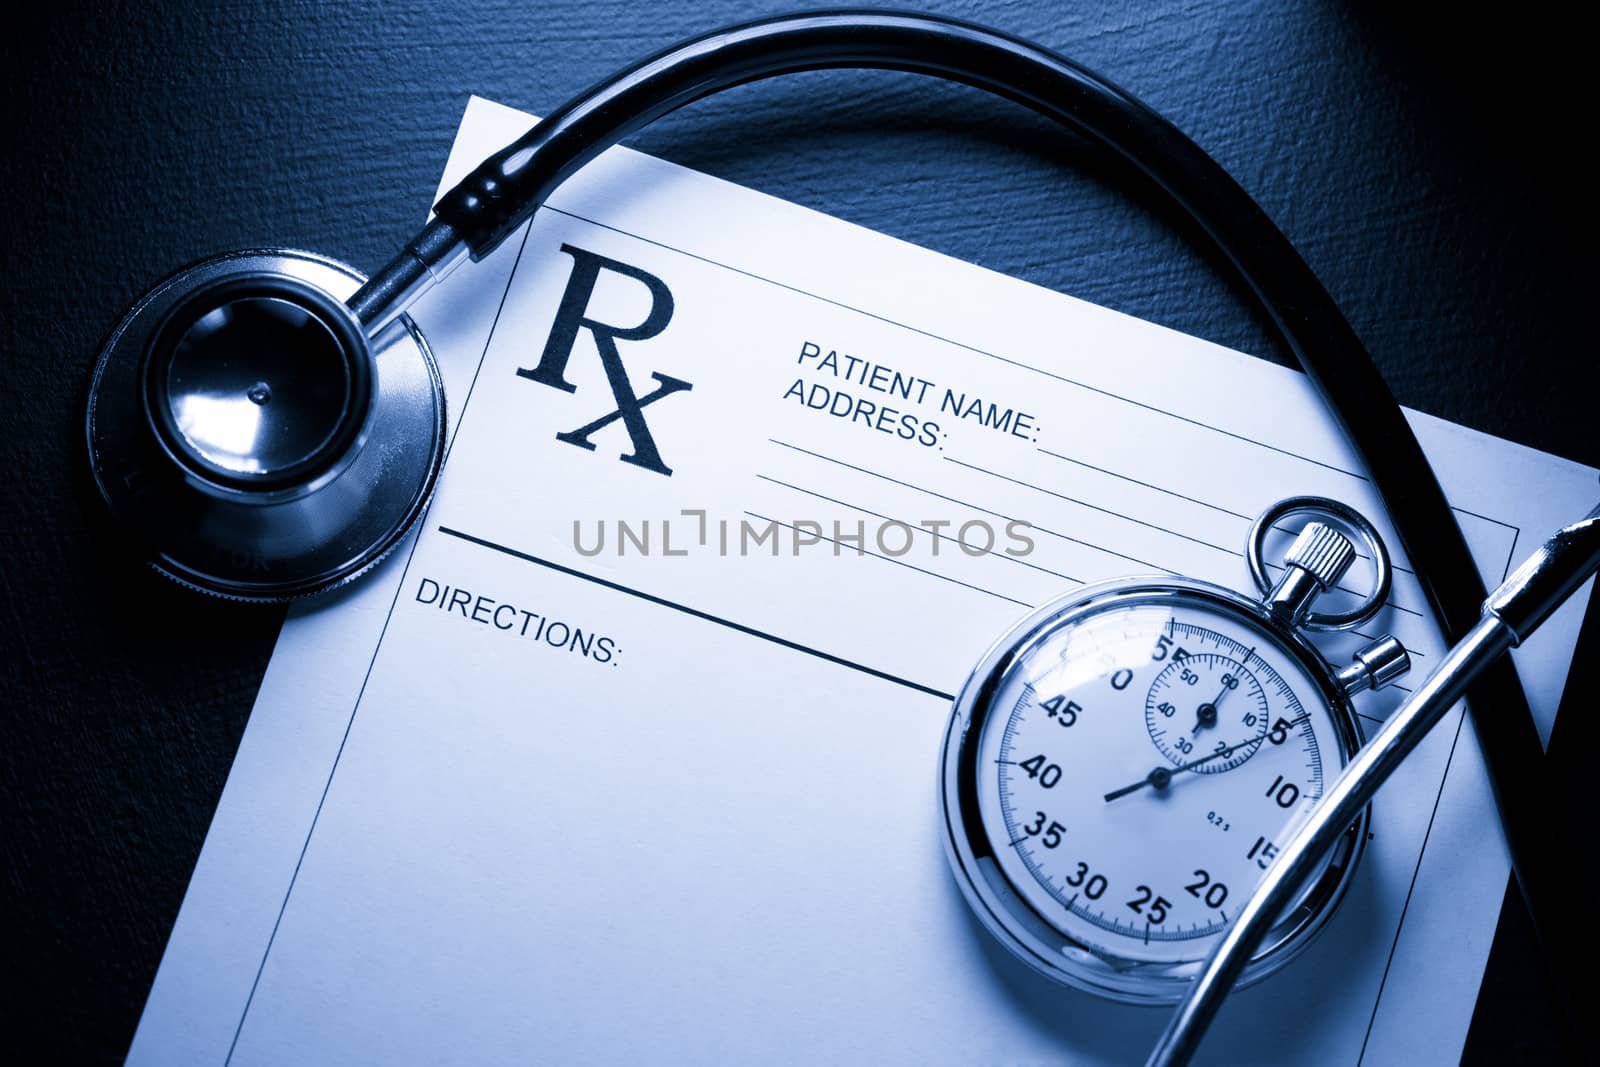 Stethoscope, stopwatch and patient list on black